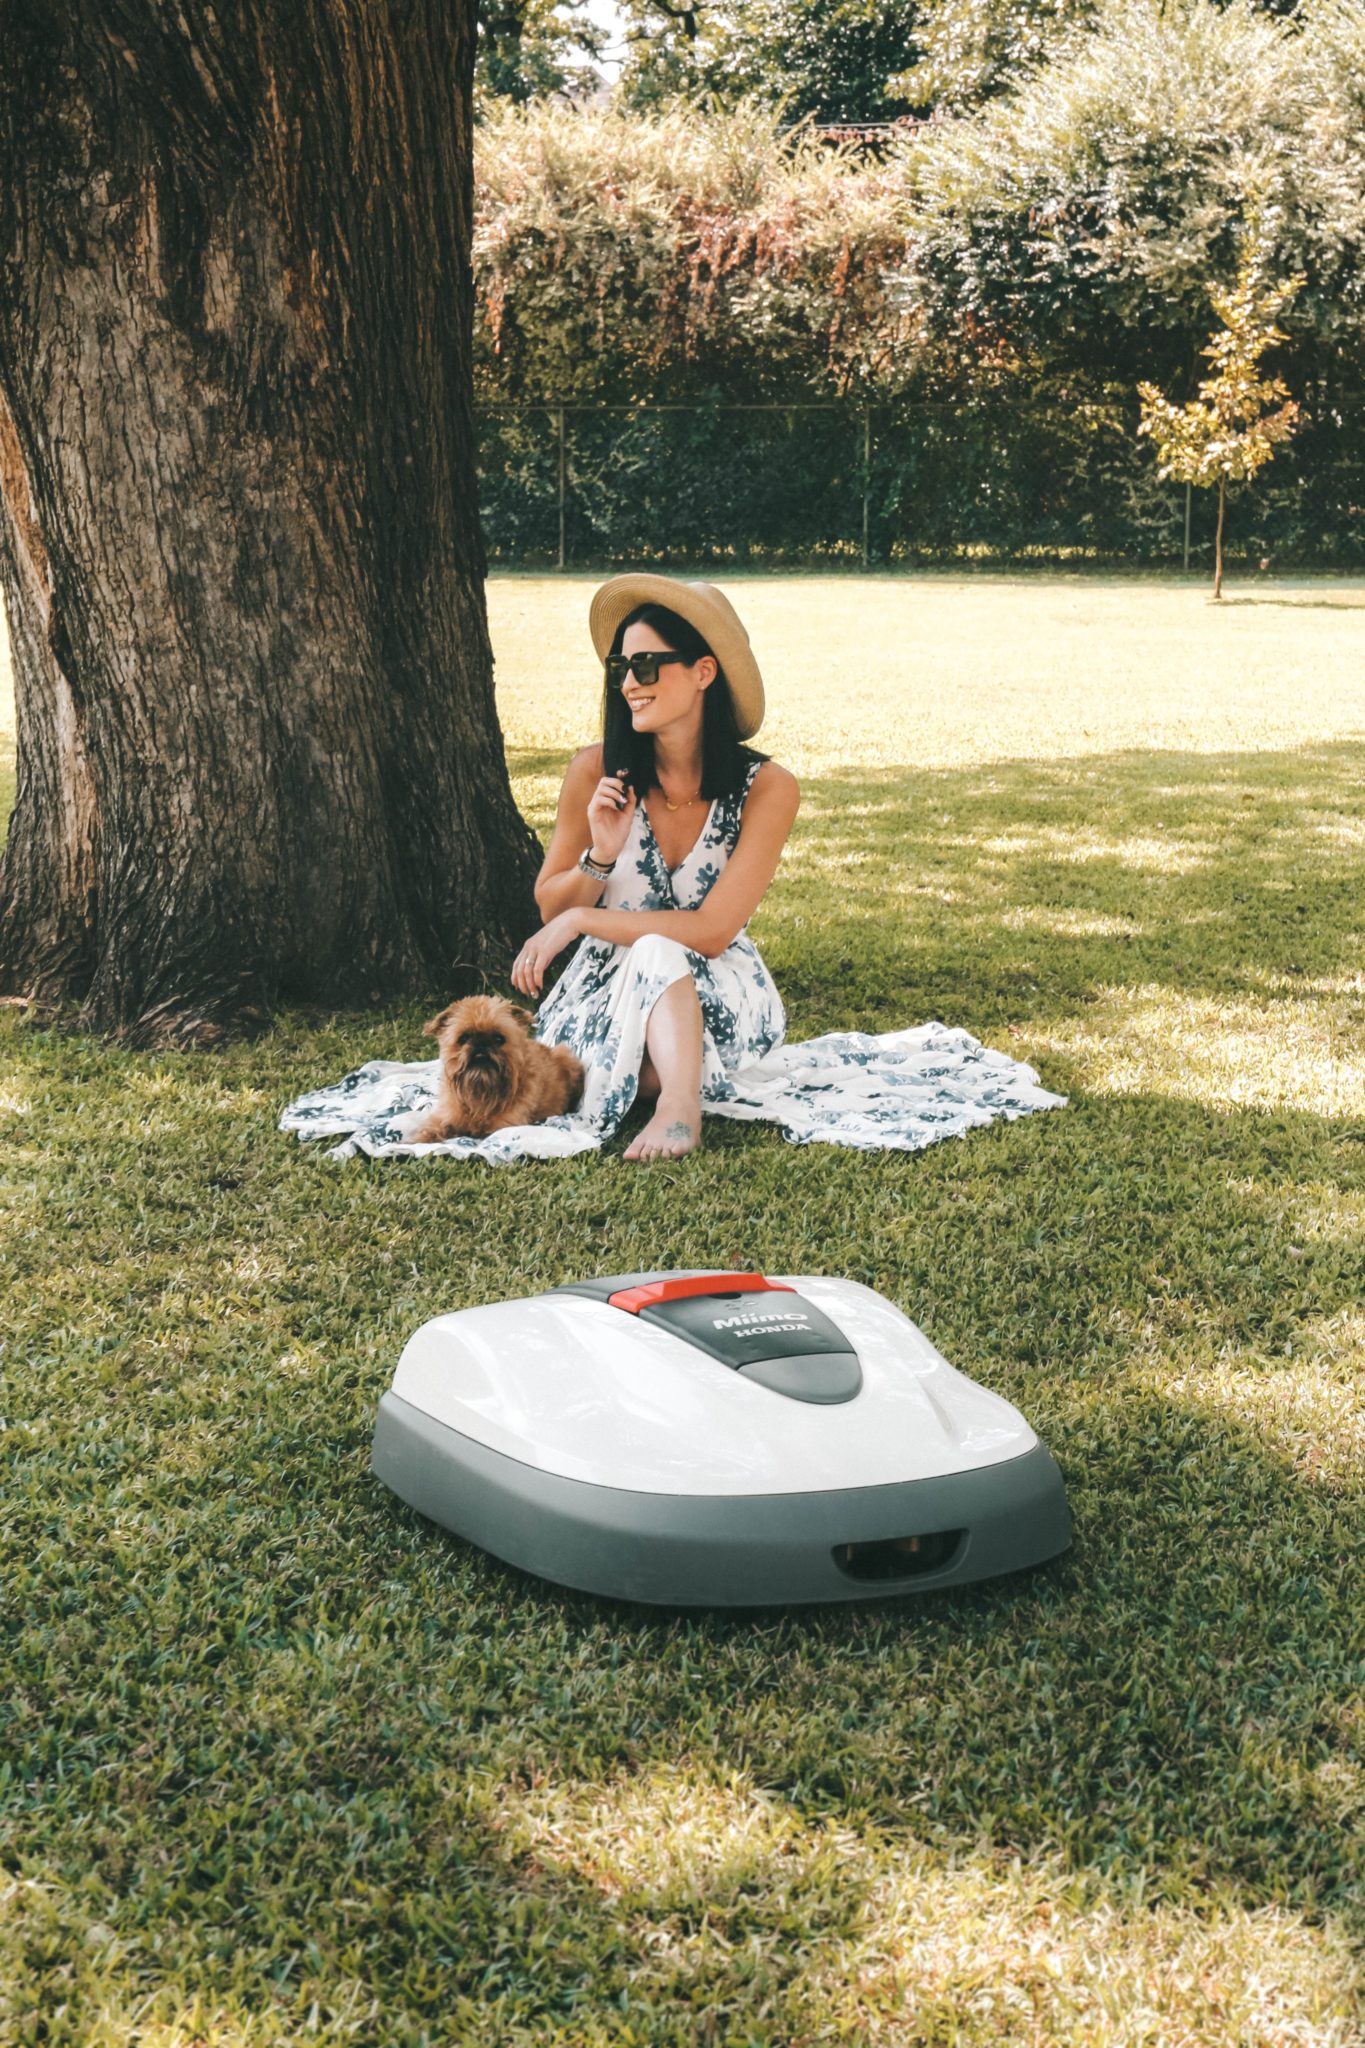 Honda Miimo Robotic Lawn Mower Review by popular Austin lifestyle blog, Dressed to Kill: image of woman and her dog sitting near the Honda Miimo Robotic Lawn Mower.